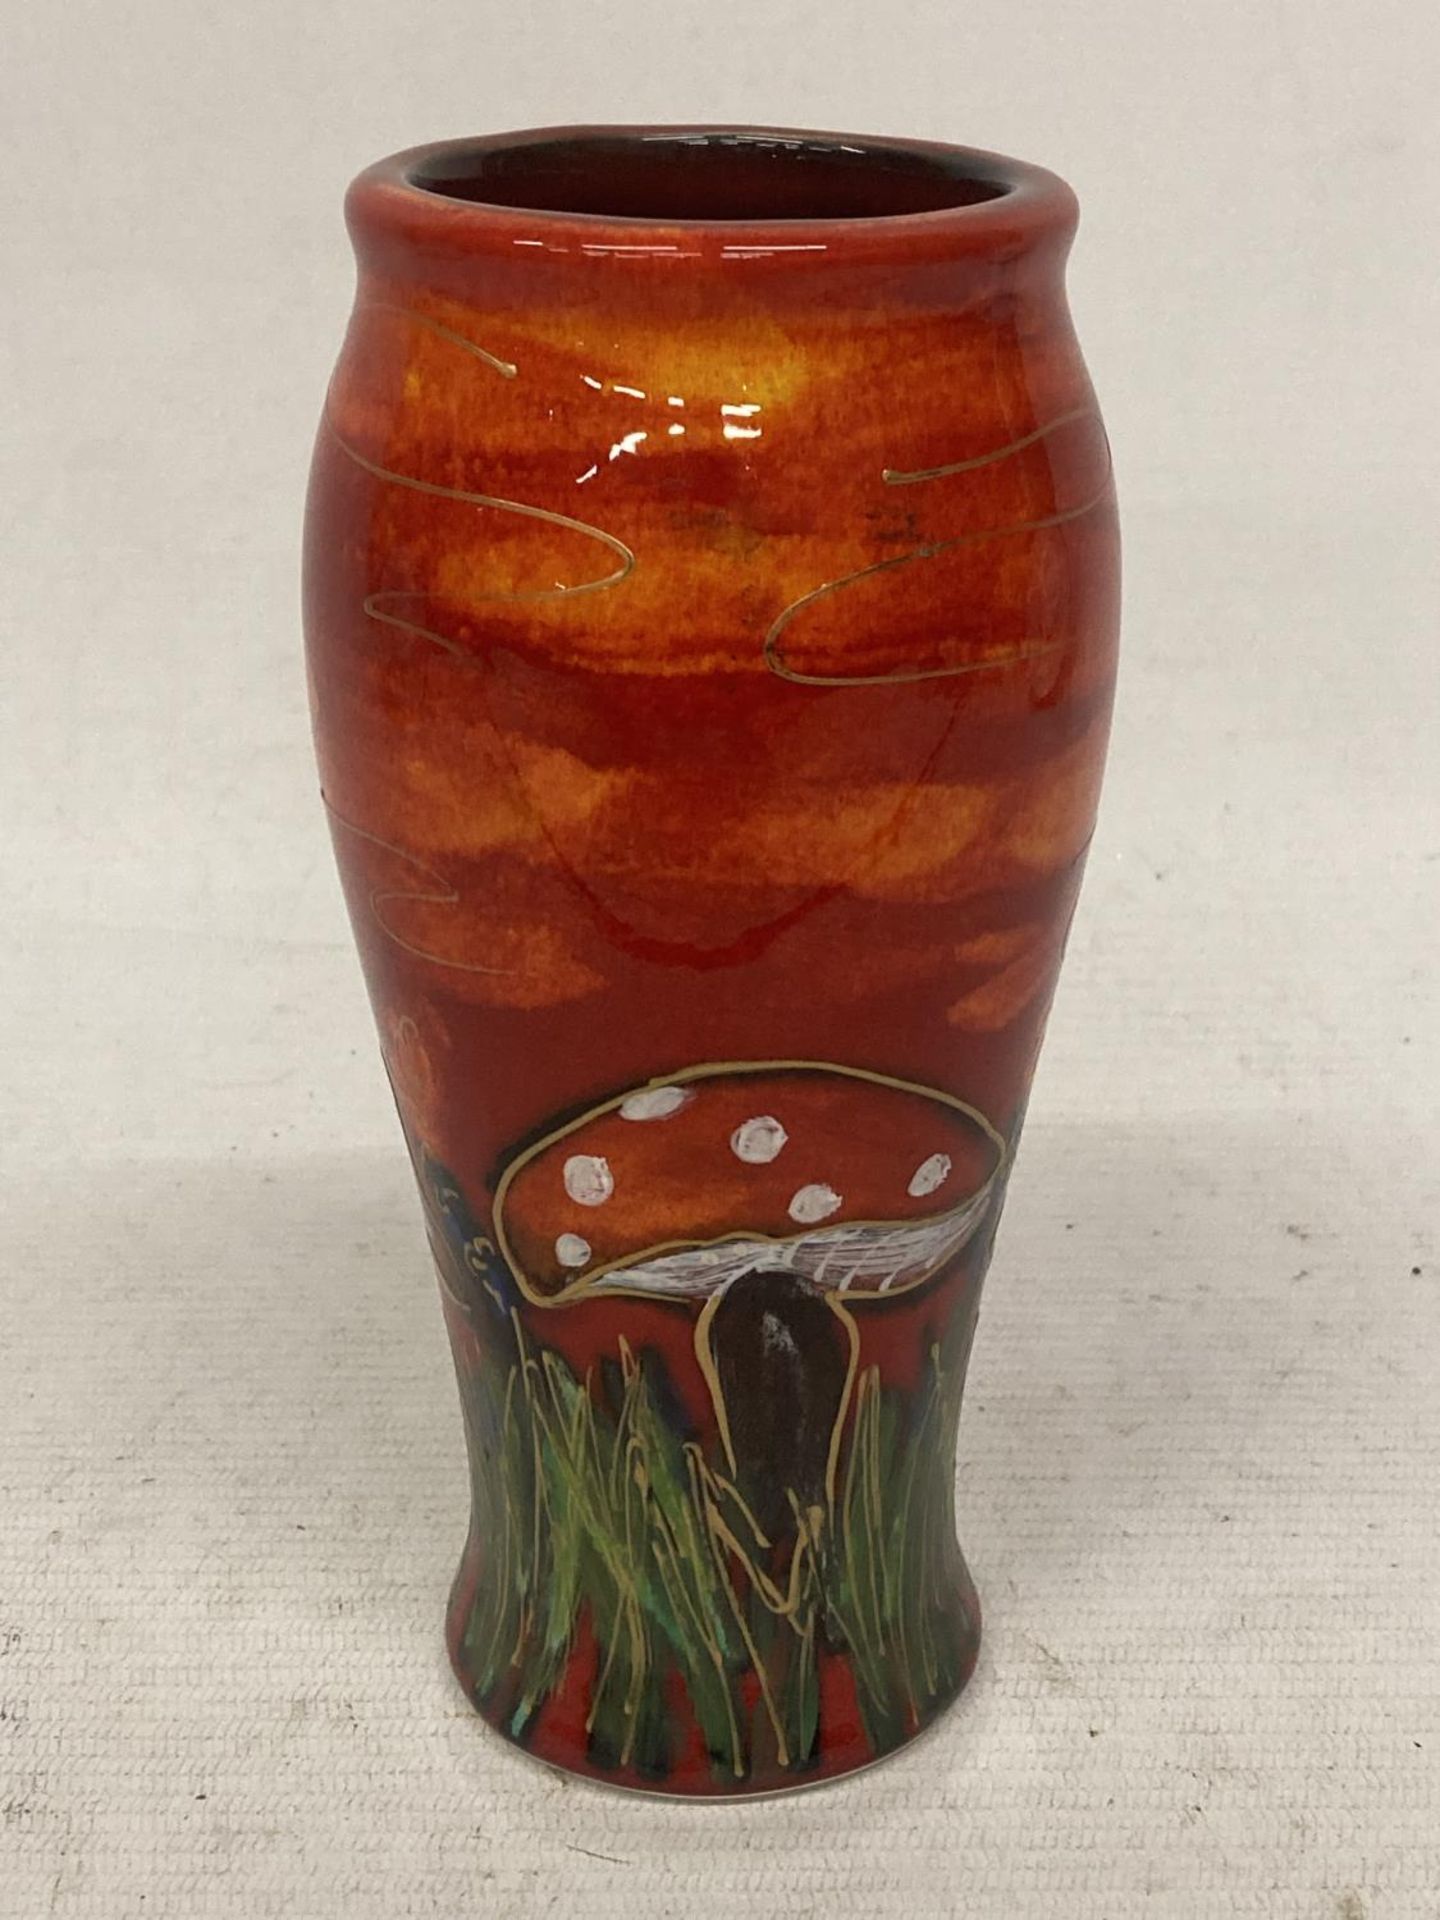 AN ANITA HARRIS TOADSTOOLS VASE HAND PAINTED AND SIGNED IN GOLD - Image 2 of 3